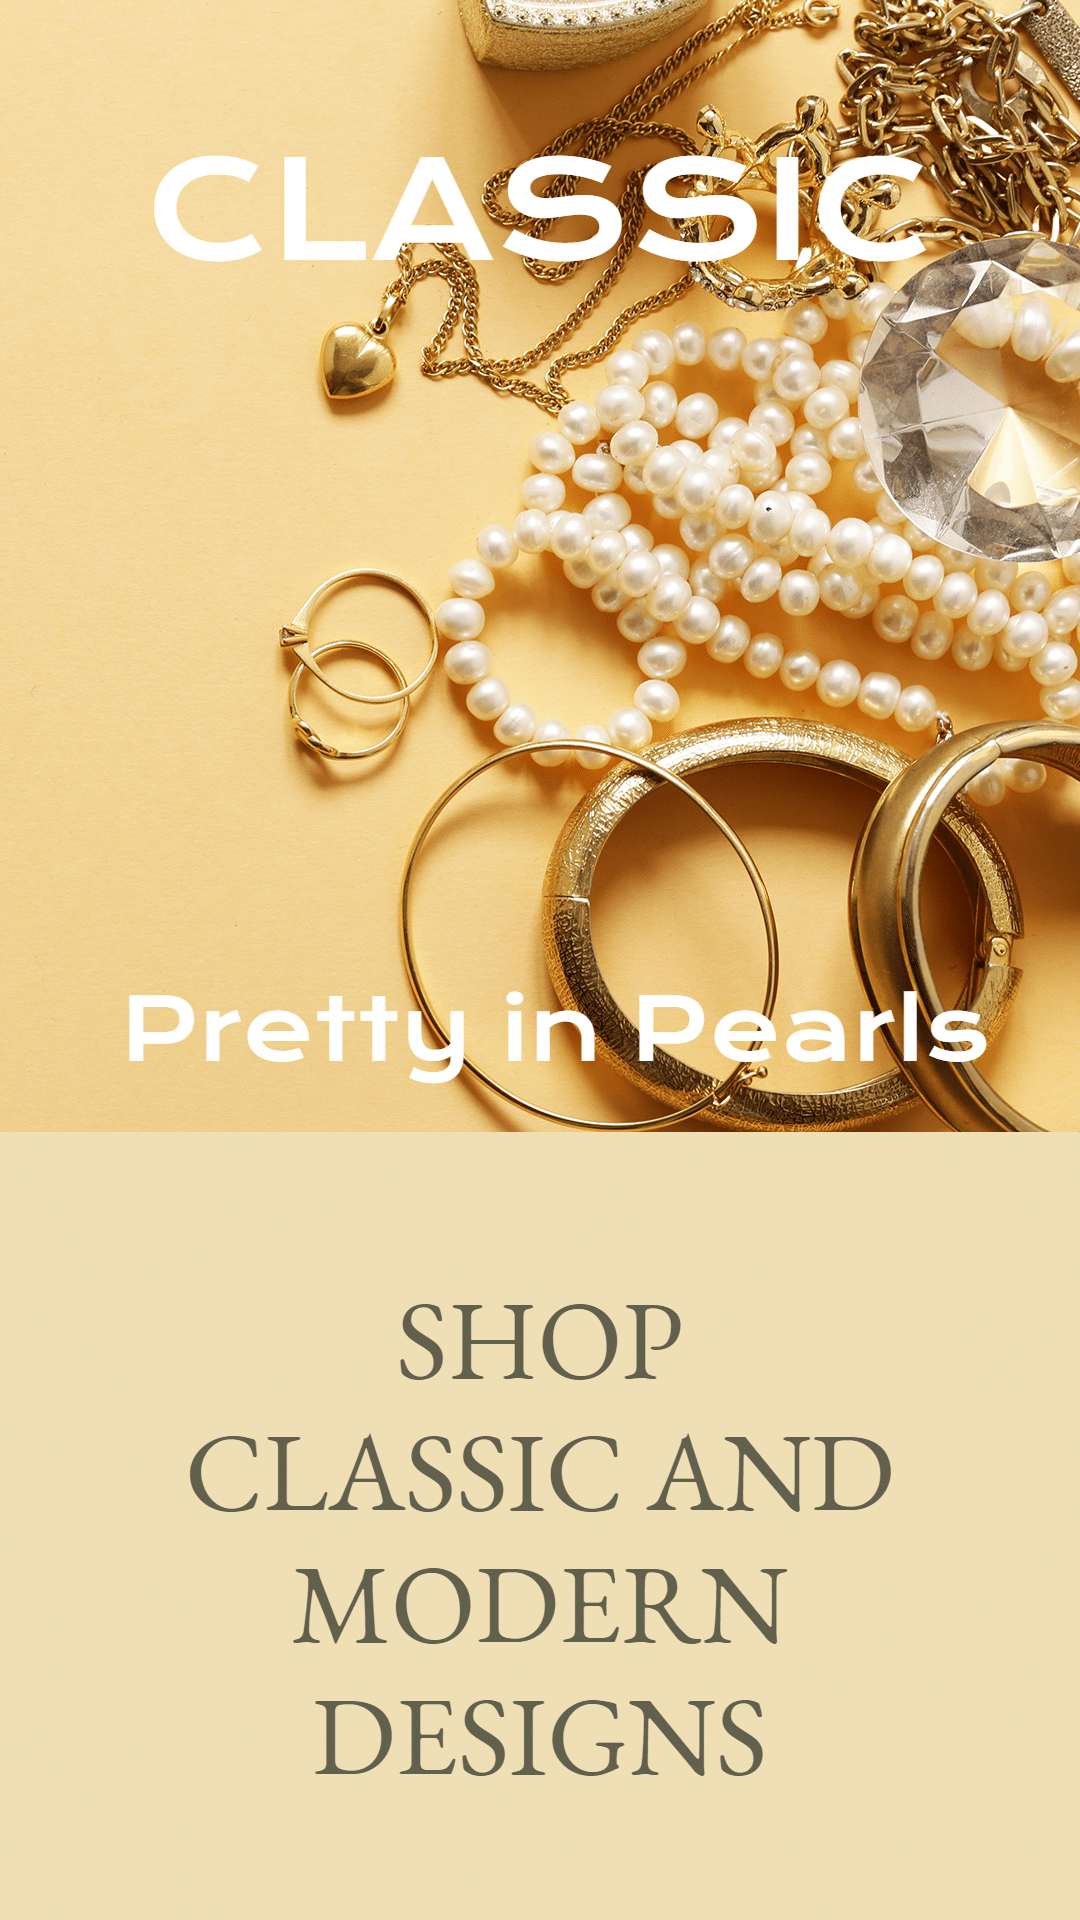 Pearl Jewelry New Year Holiday New Arrival Ecommerce Story预览效果